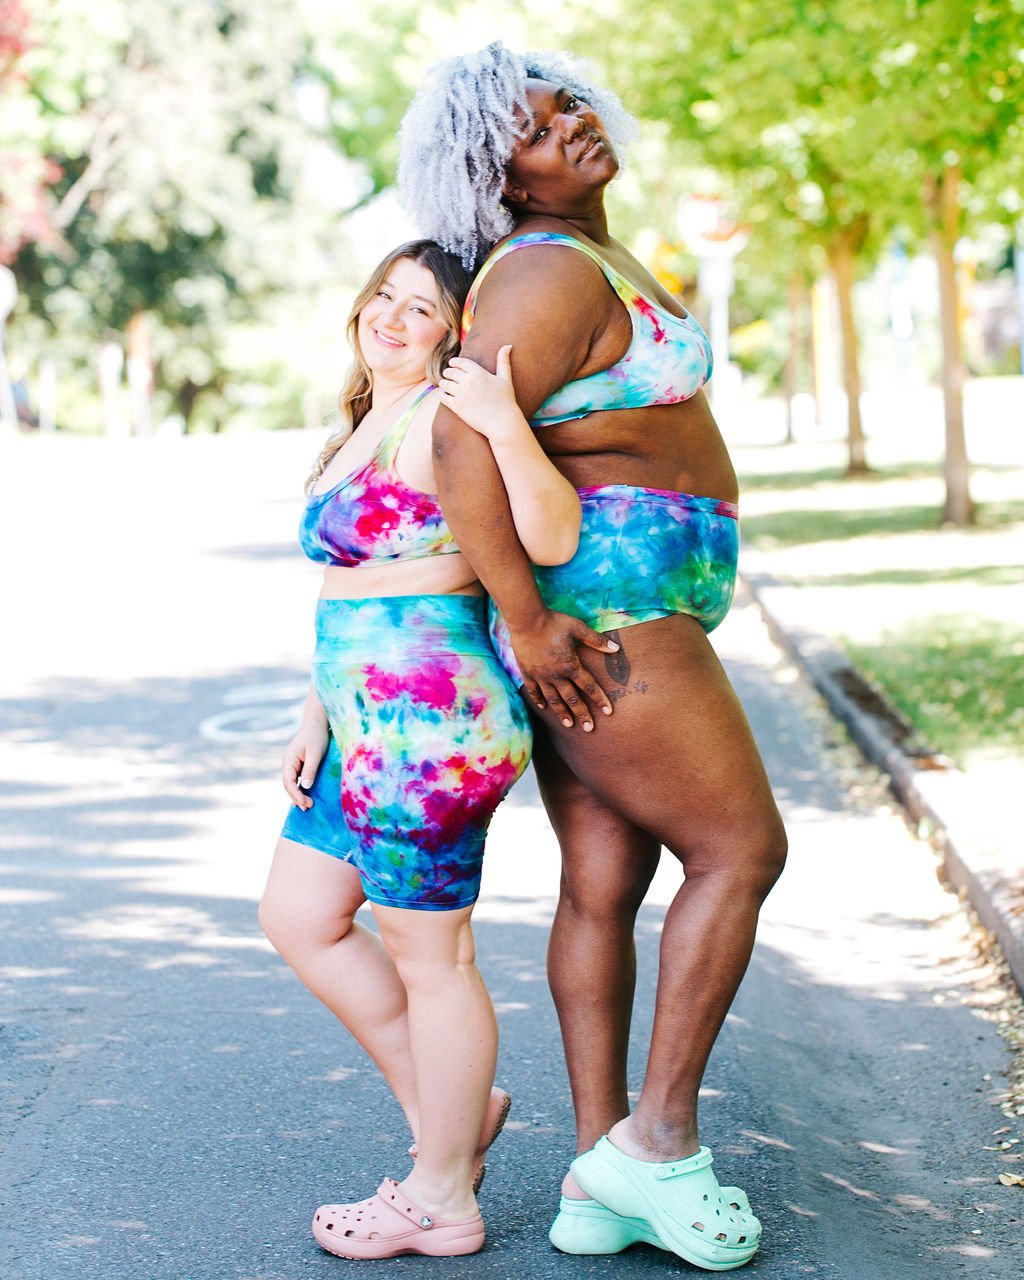 Two models back to back wearing Thunderpants organic cotton Bralettes, Original style underwear, and Bike Shorts in hand dyed Ice Dye multi-colored tie-die.